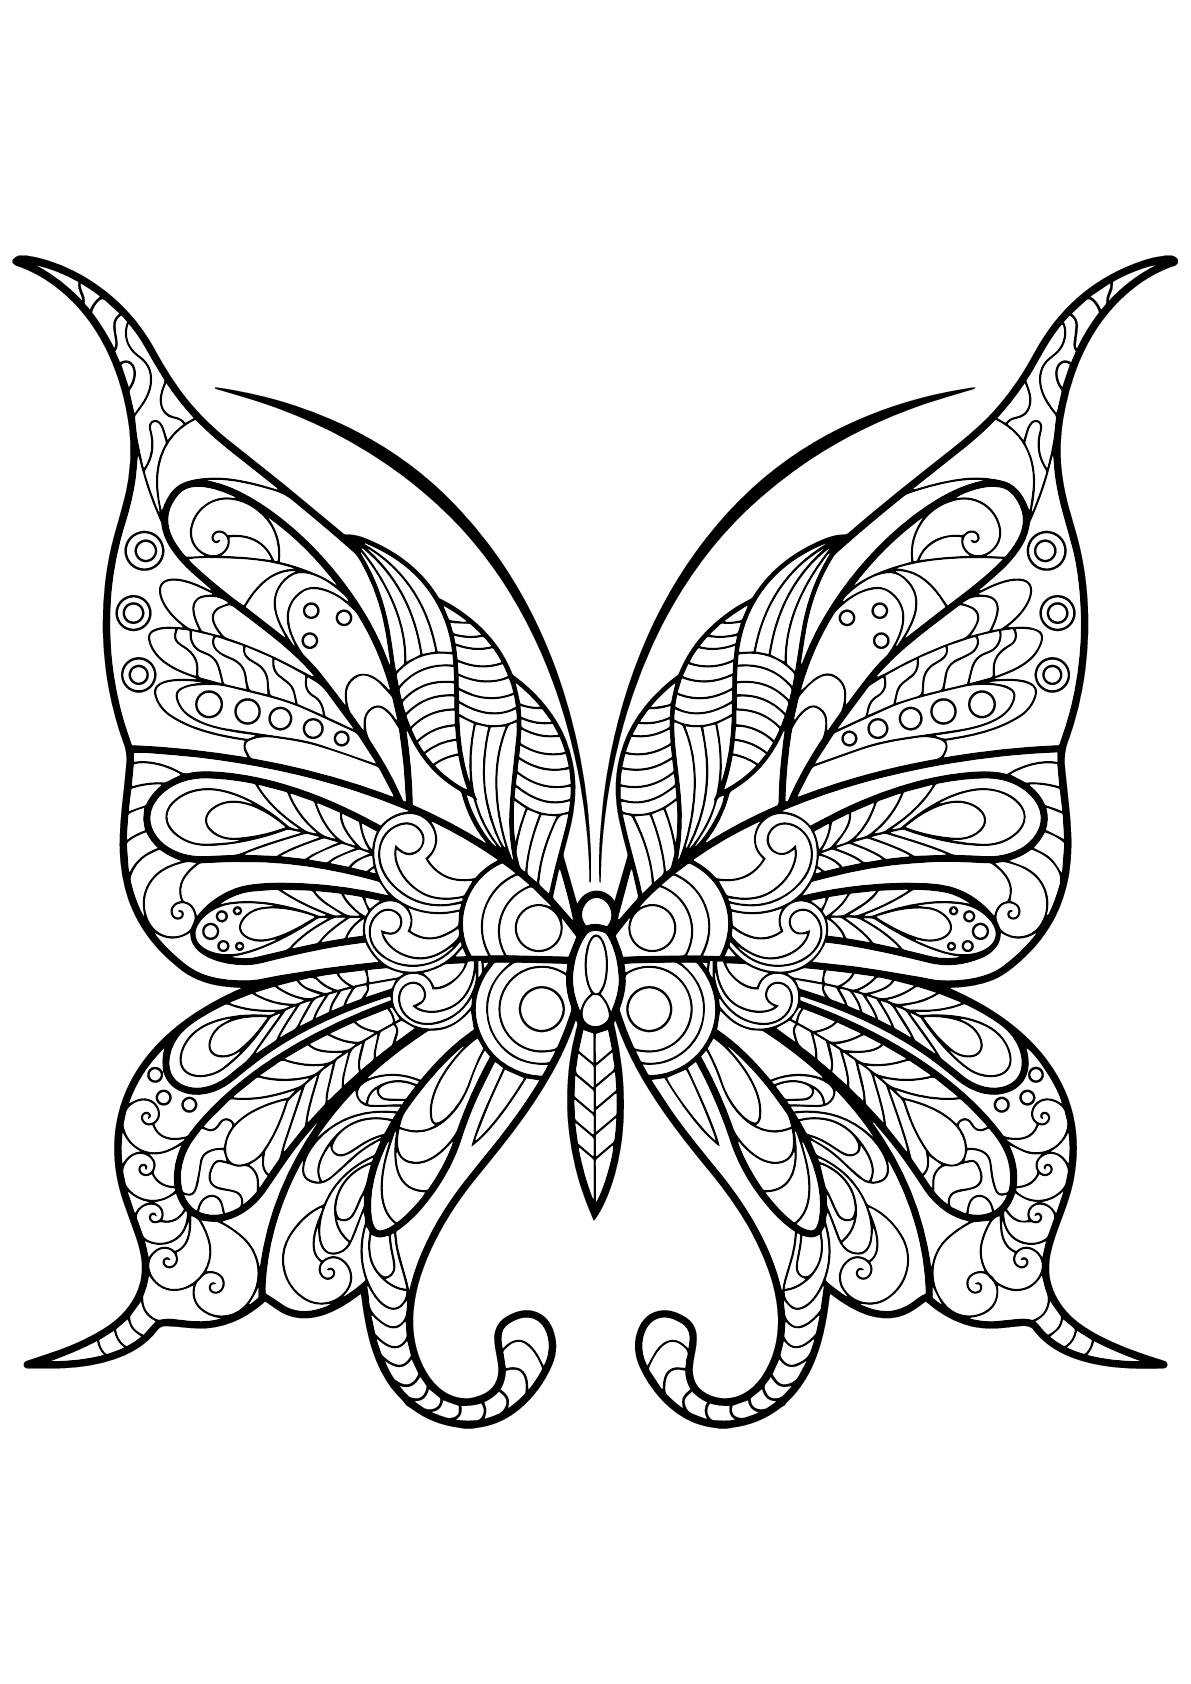 Butterfly beautiful patterns - 9 - Butterflies & insects Adult Coloring ...